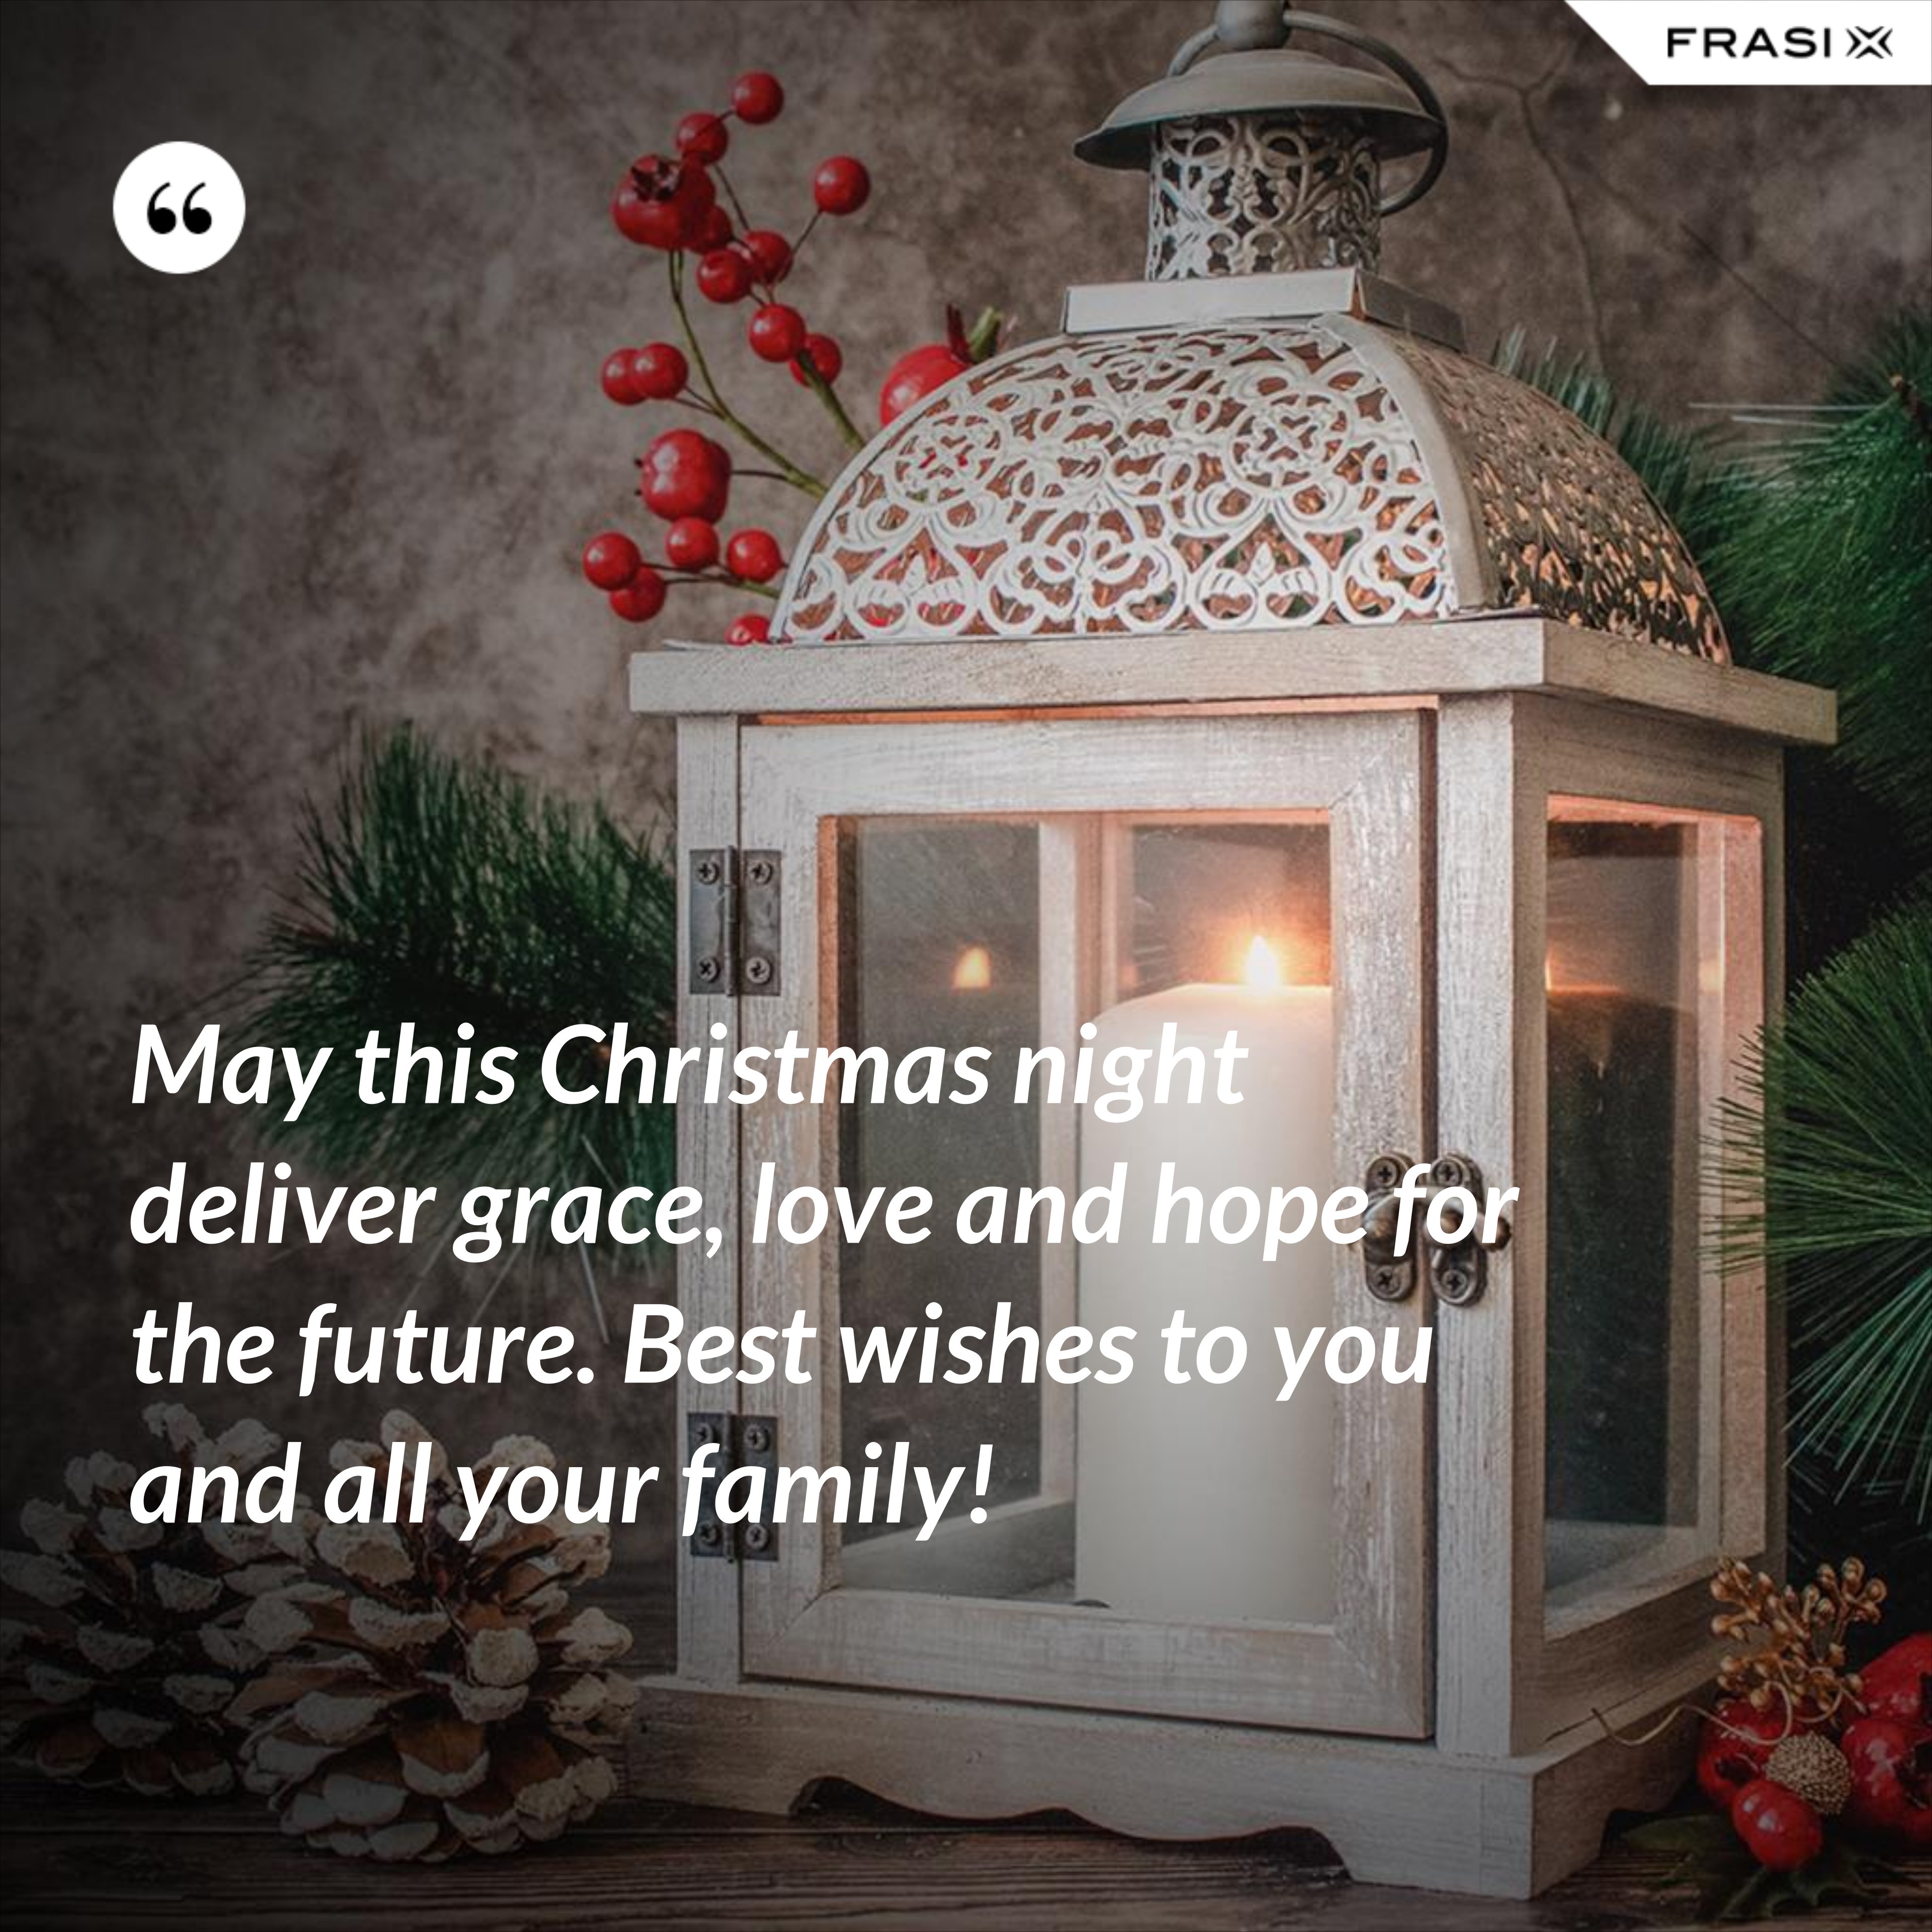 May this Christmas night deliver grace, love and hope for the future. Best wishes to you and all your family! - Anonimo